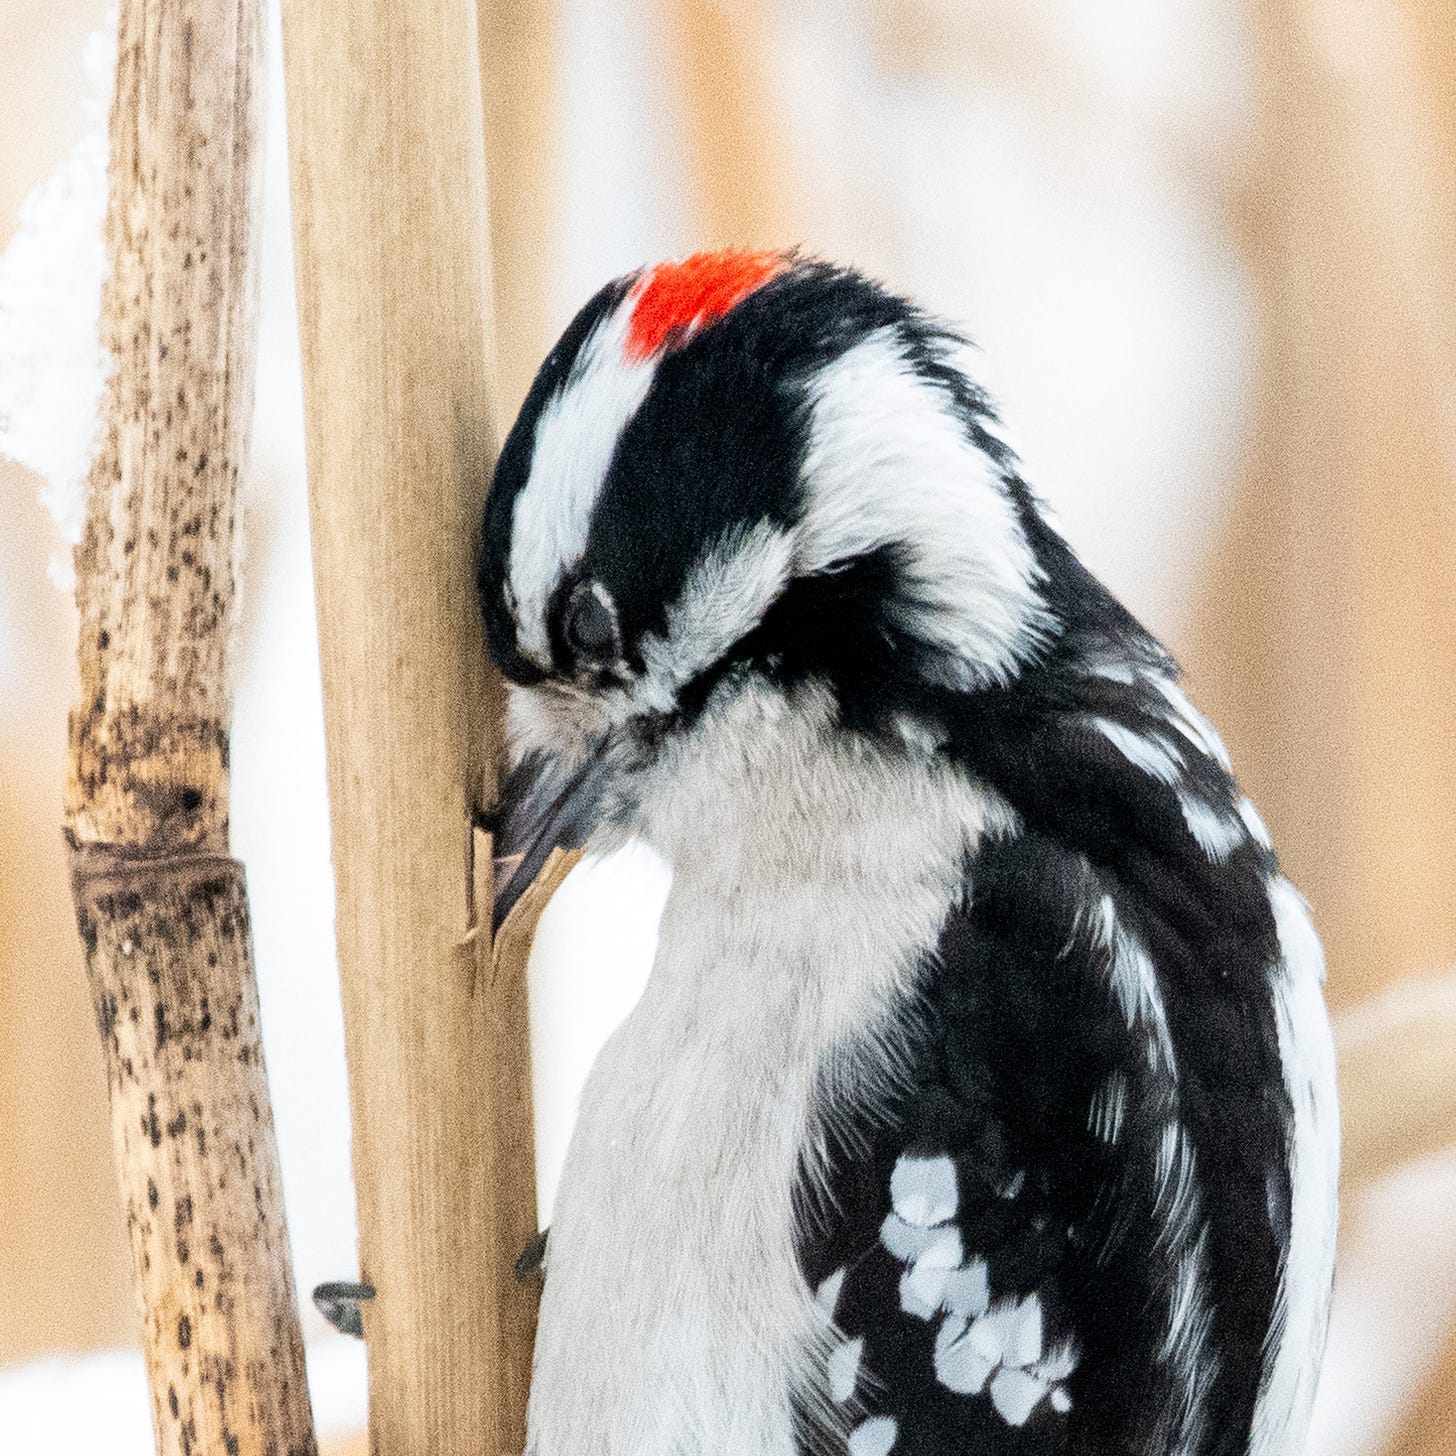 A black-and-white woodpecker, with a patch of red on the back of its head, has thrust its beak deep into a reed